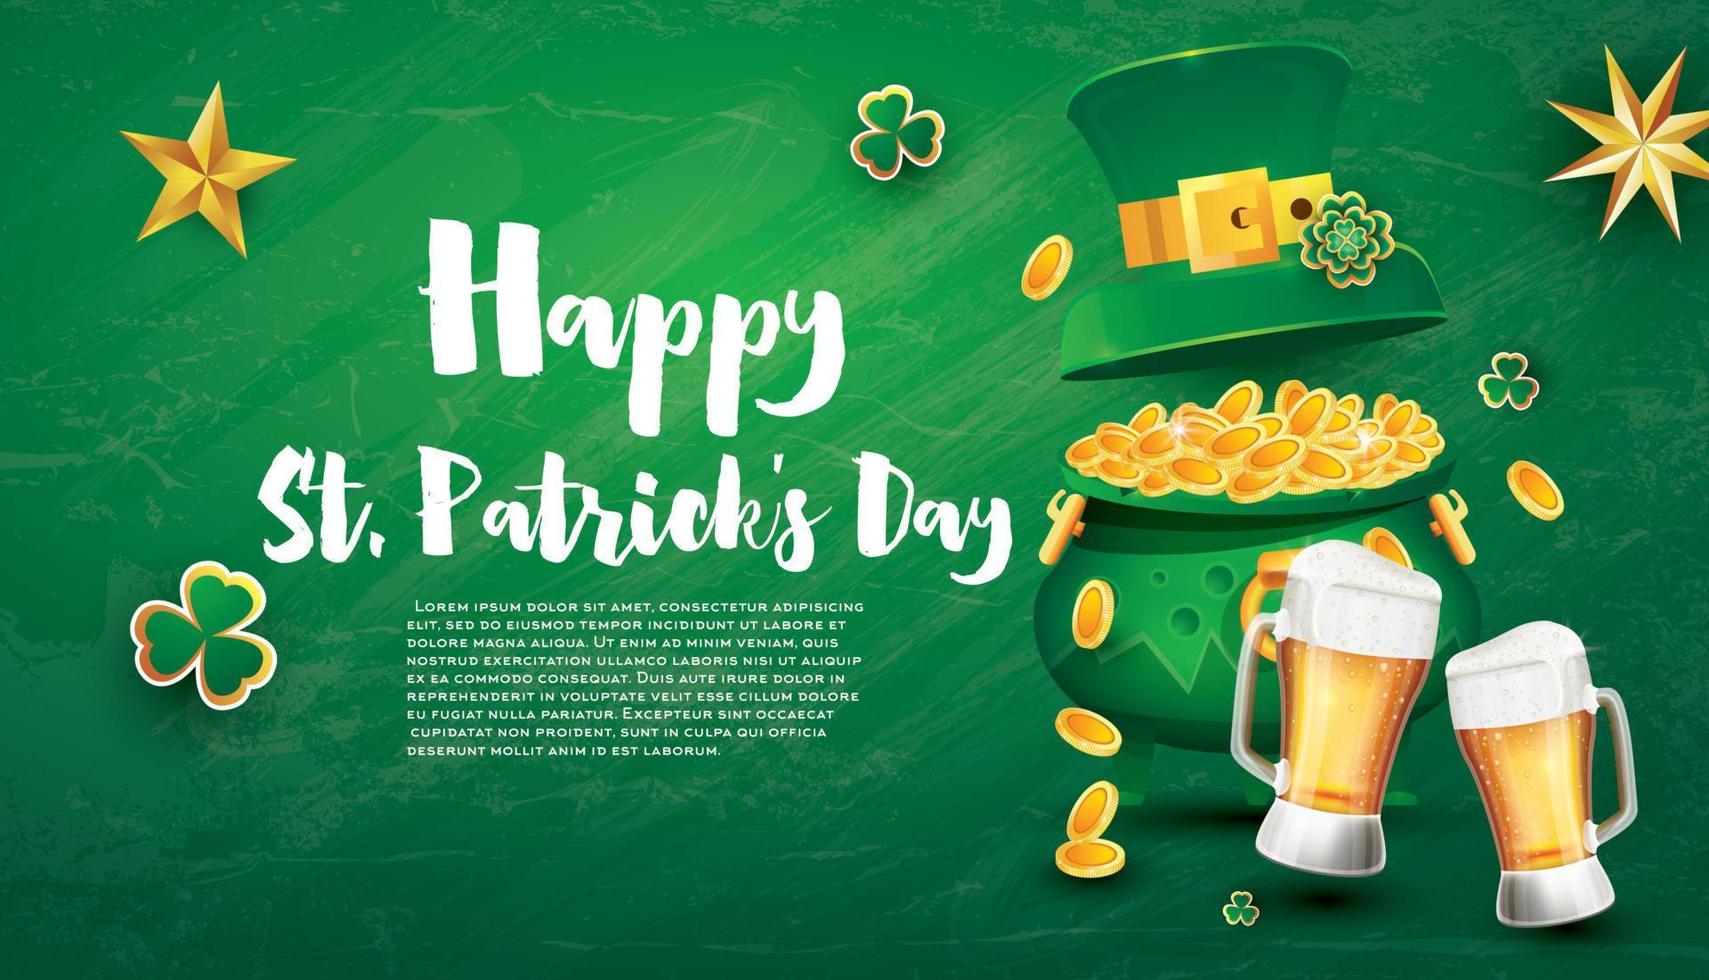 Saint Patricks Day Festive Banner with Pot Filled Golden Coins, Glass of Beer, Green Top Hat and Shamrock. vector